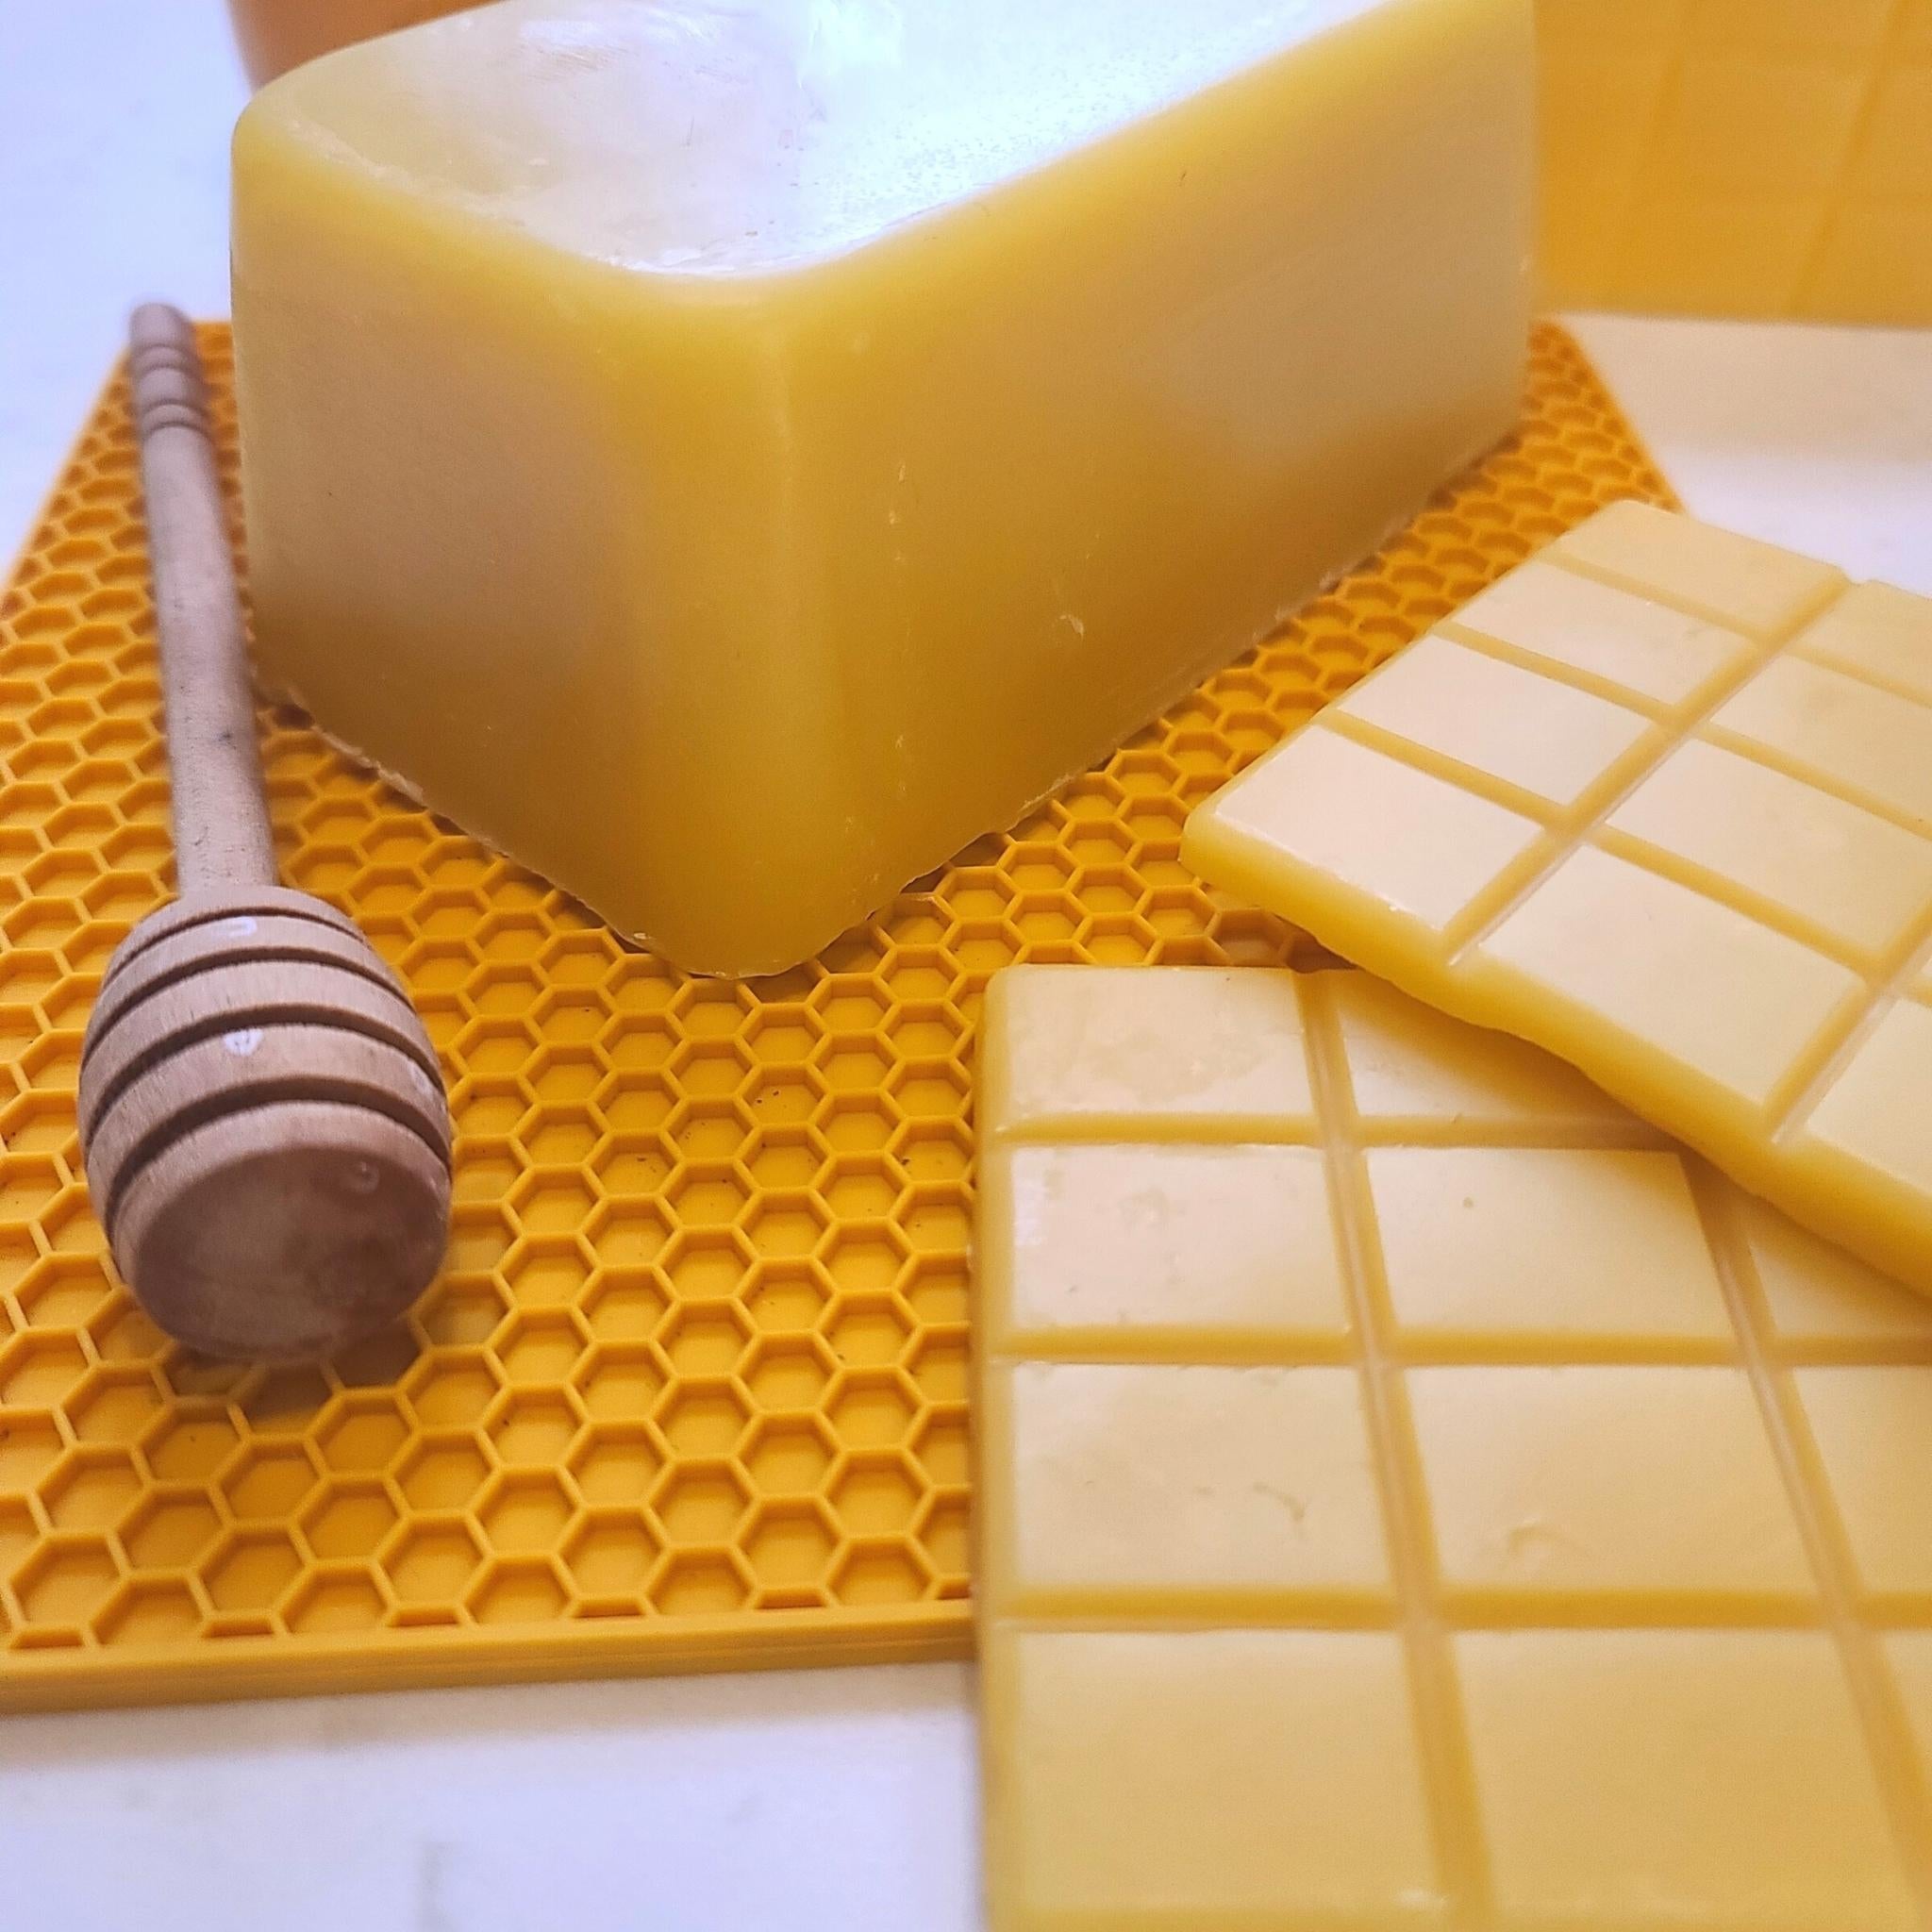 Top Beeswax Uses for Skin & DIY Recipes - Simple Pure Beauty